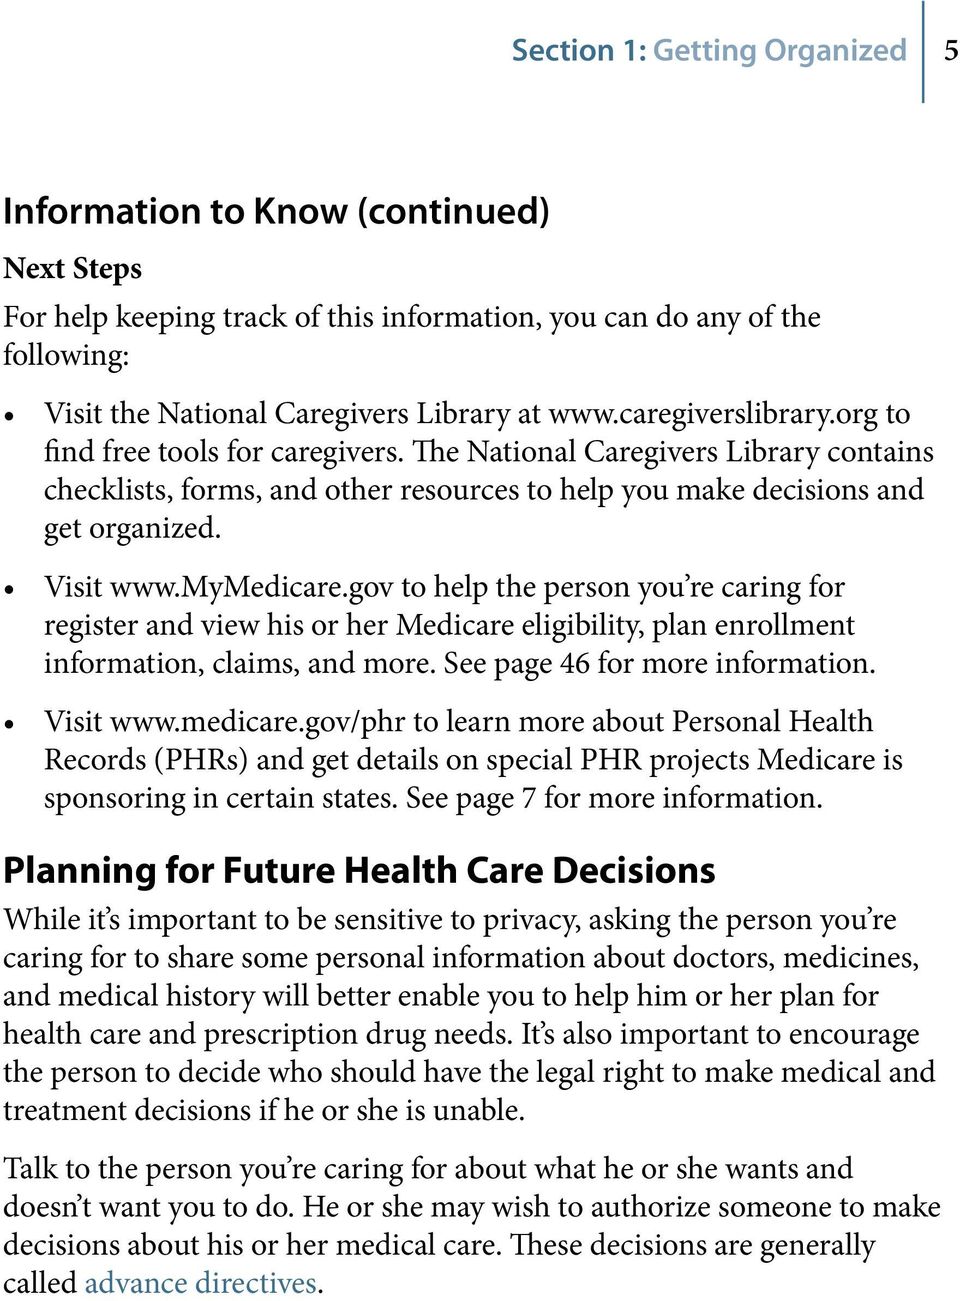 mymedicare.gov to help the person you re caring for register and view his or her Medicare eligibility, plan enrollment information, claims, and more. See page 46 for more information. Visit www.